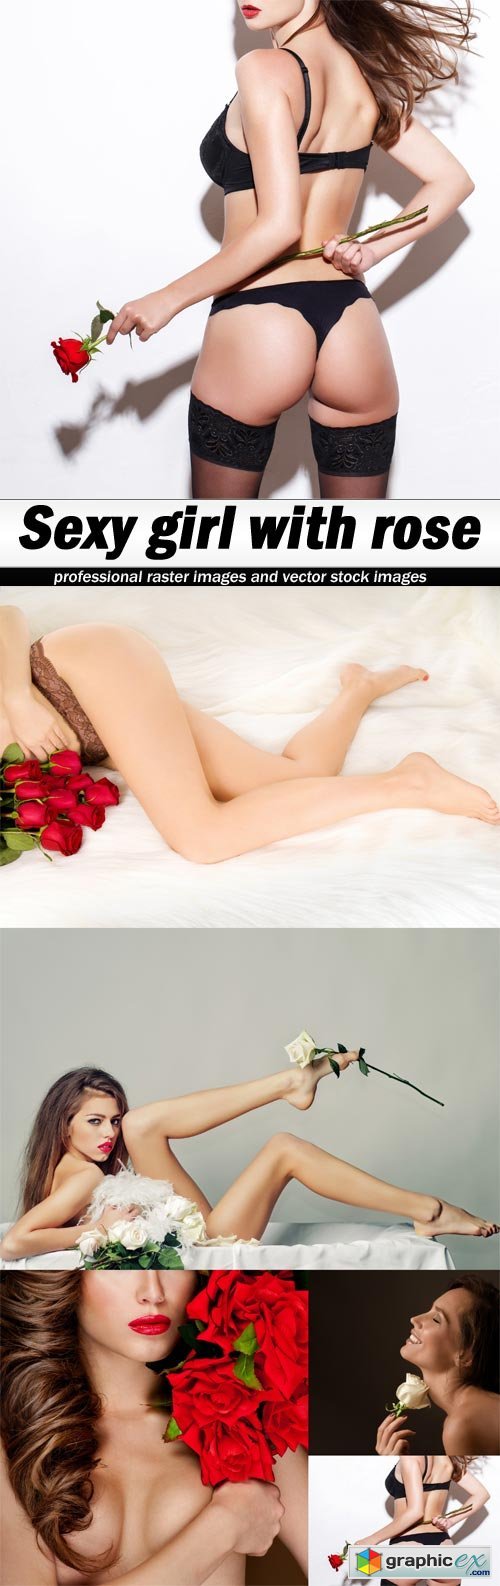 Sexy girl with rose